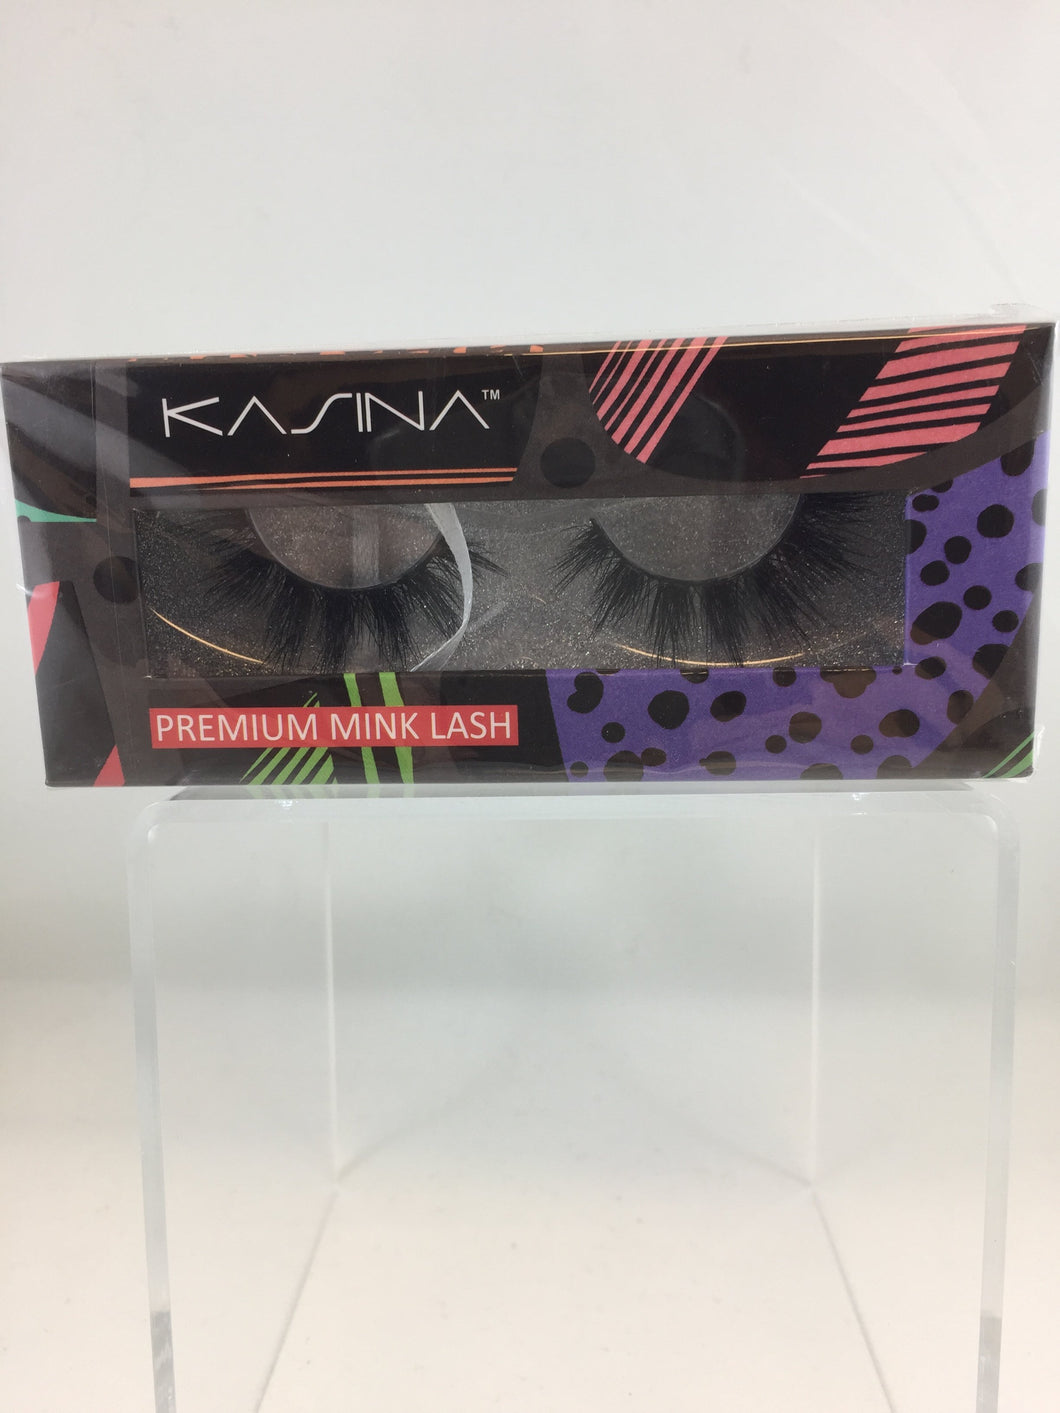 KASINA EYELASHES 100% mink lashes will embrace your eyes natural beauty while adding length and volume. And with their easy application, you will enjoy wearing them again and again.